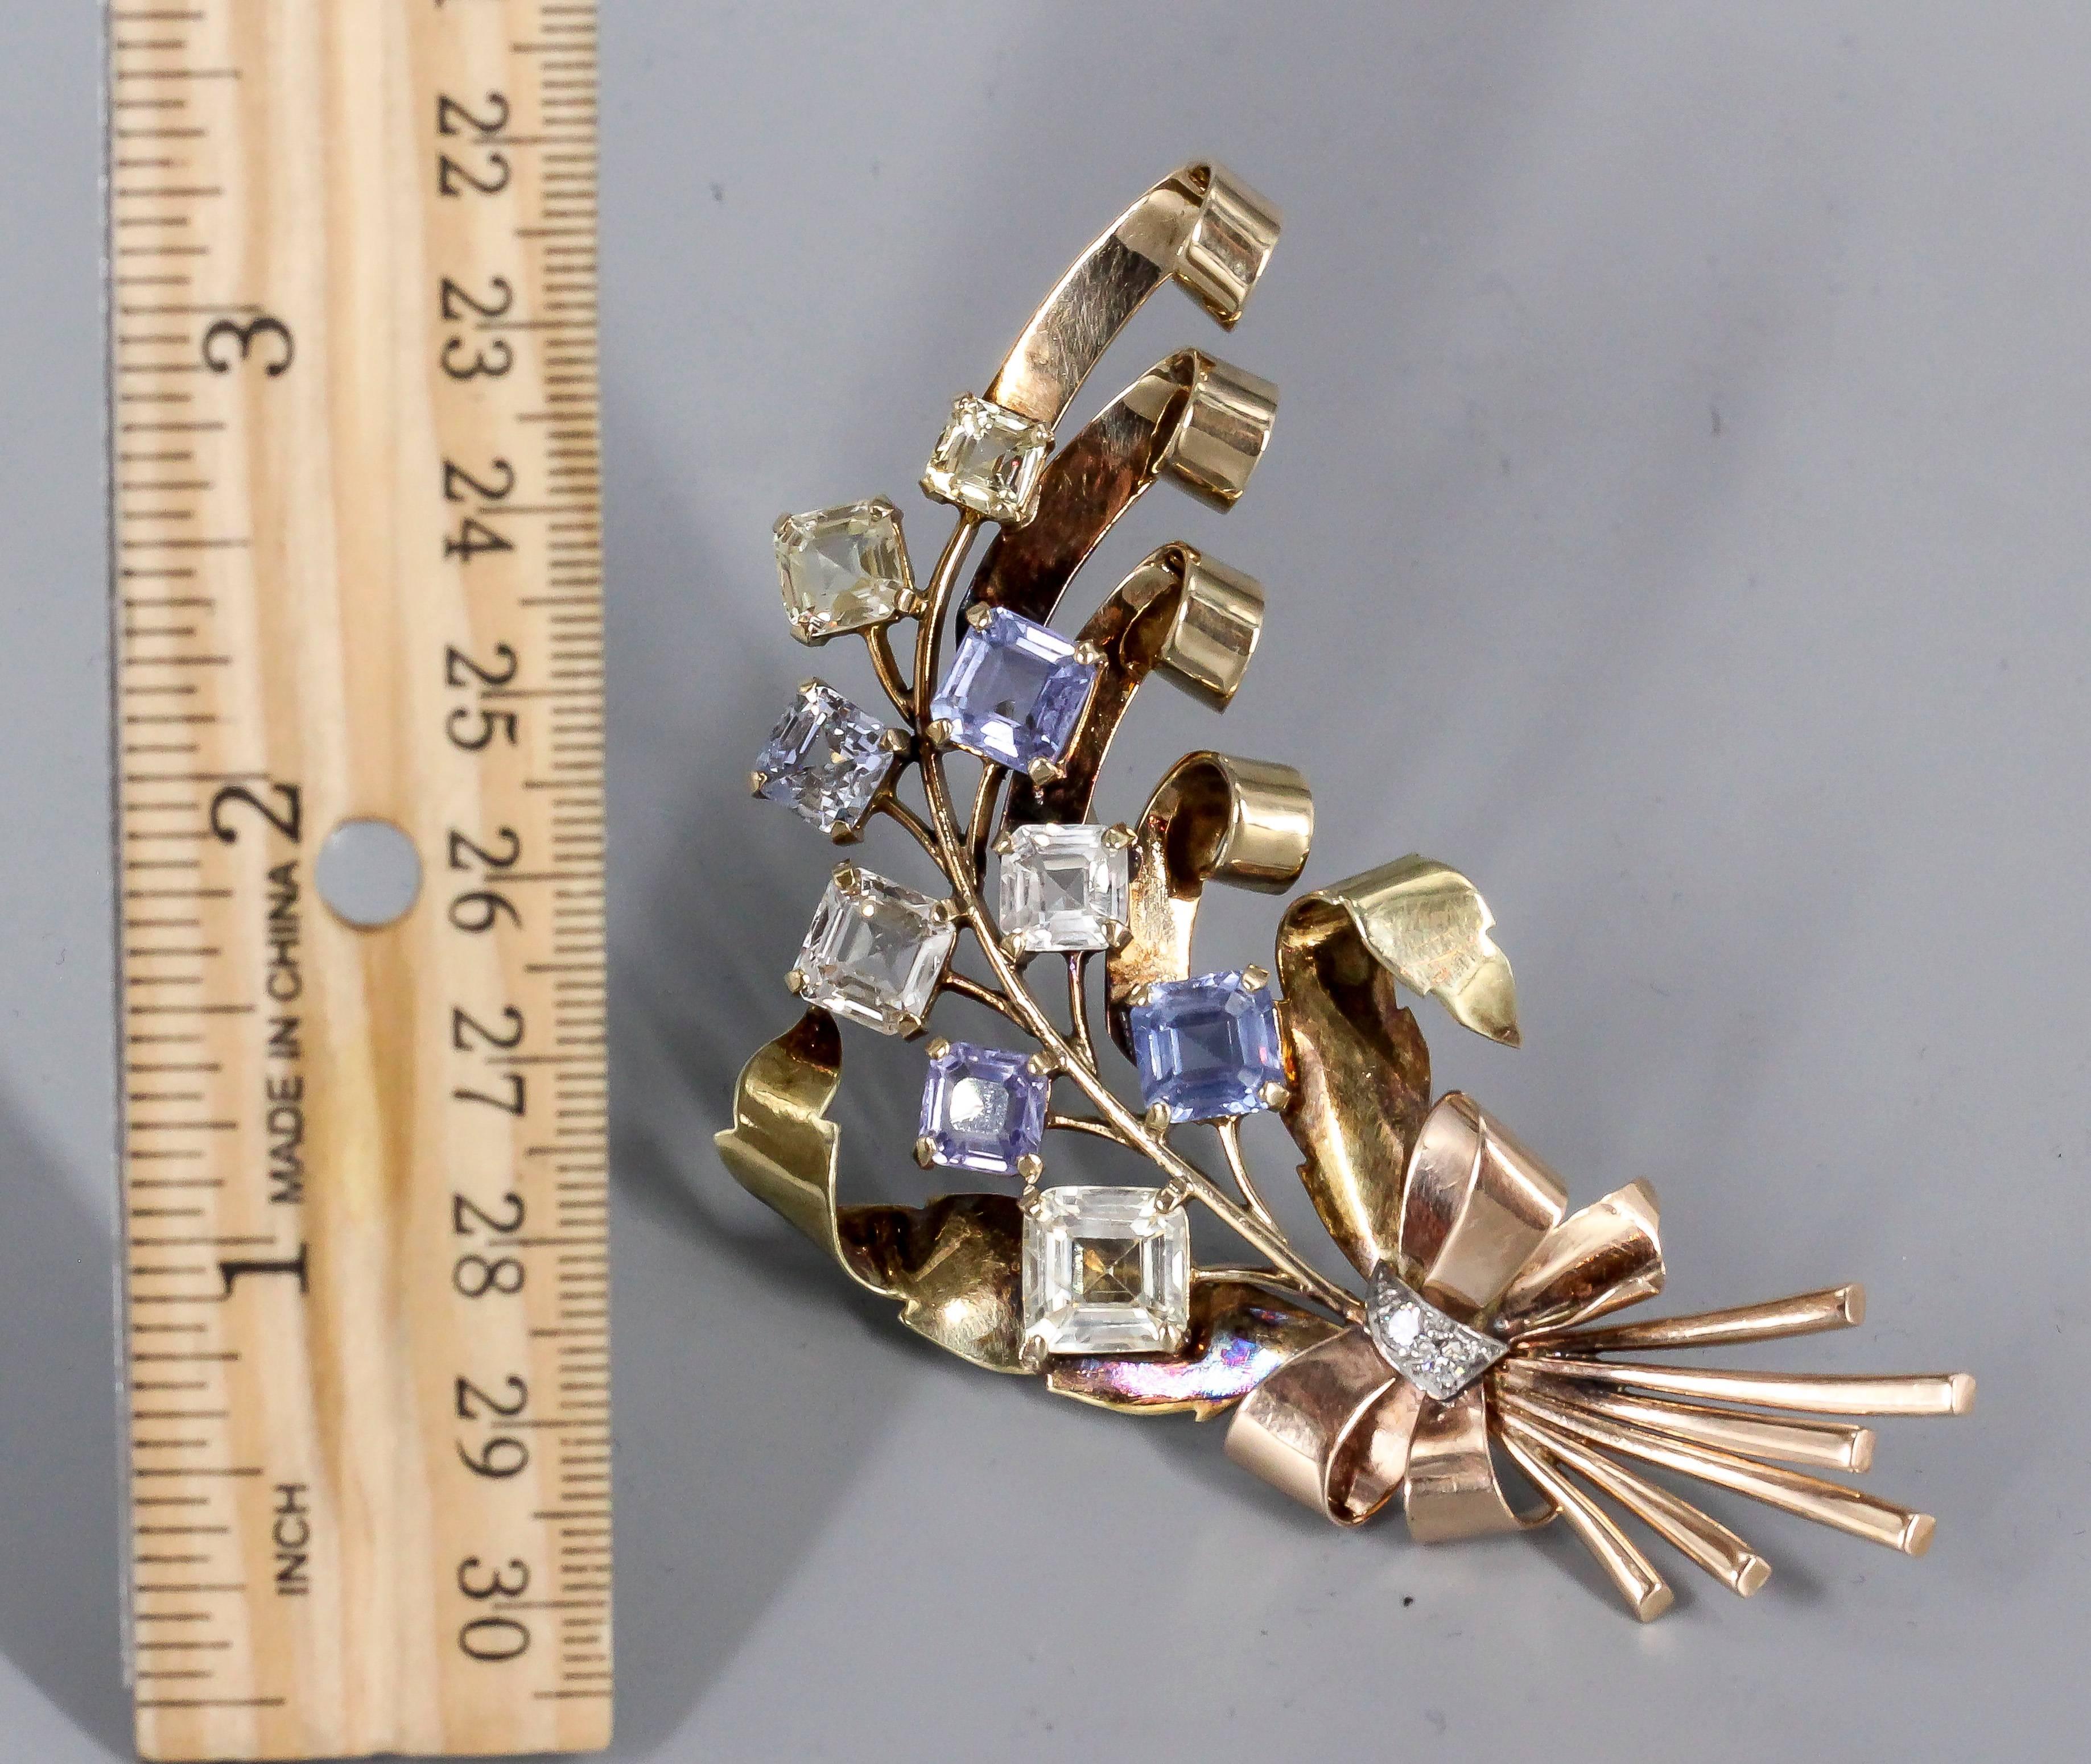 Elegant blue and yellow sapphire brooch, circa 1940s. Set in 14k yellow and pink gold, it features approx. 25 carats of colored sapphires with two round cut diamonds at the base of the brooch. True period piece that makes a statement.